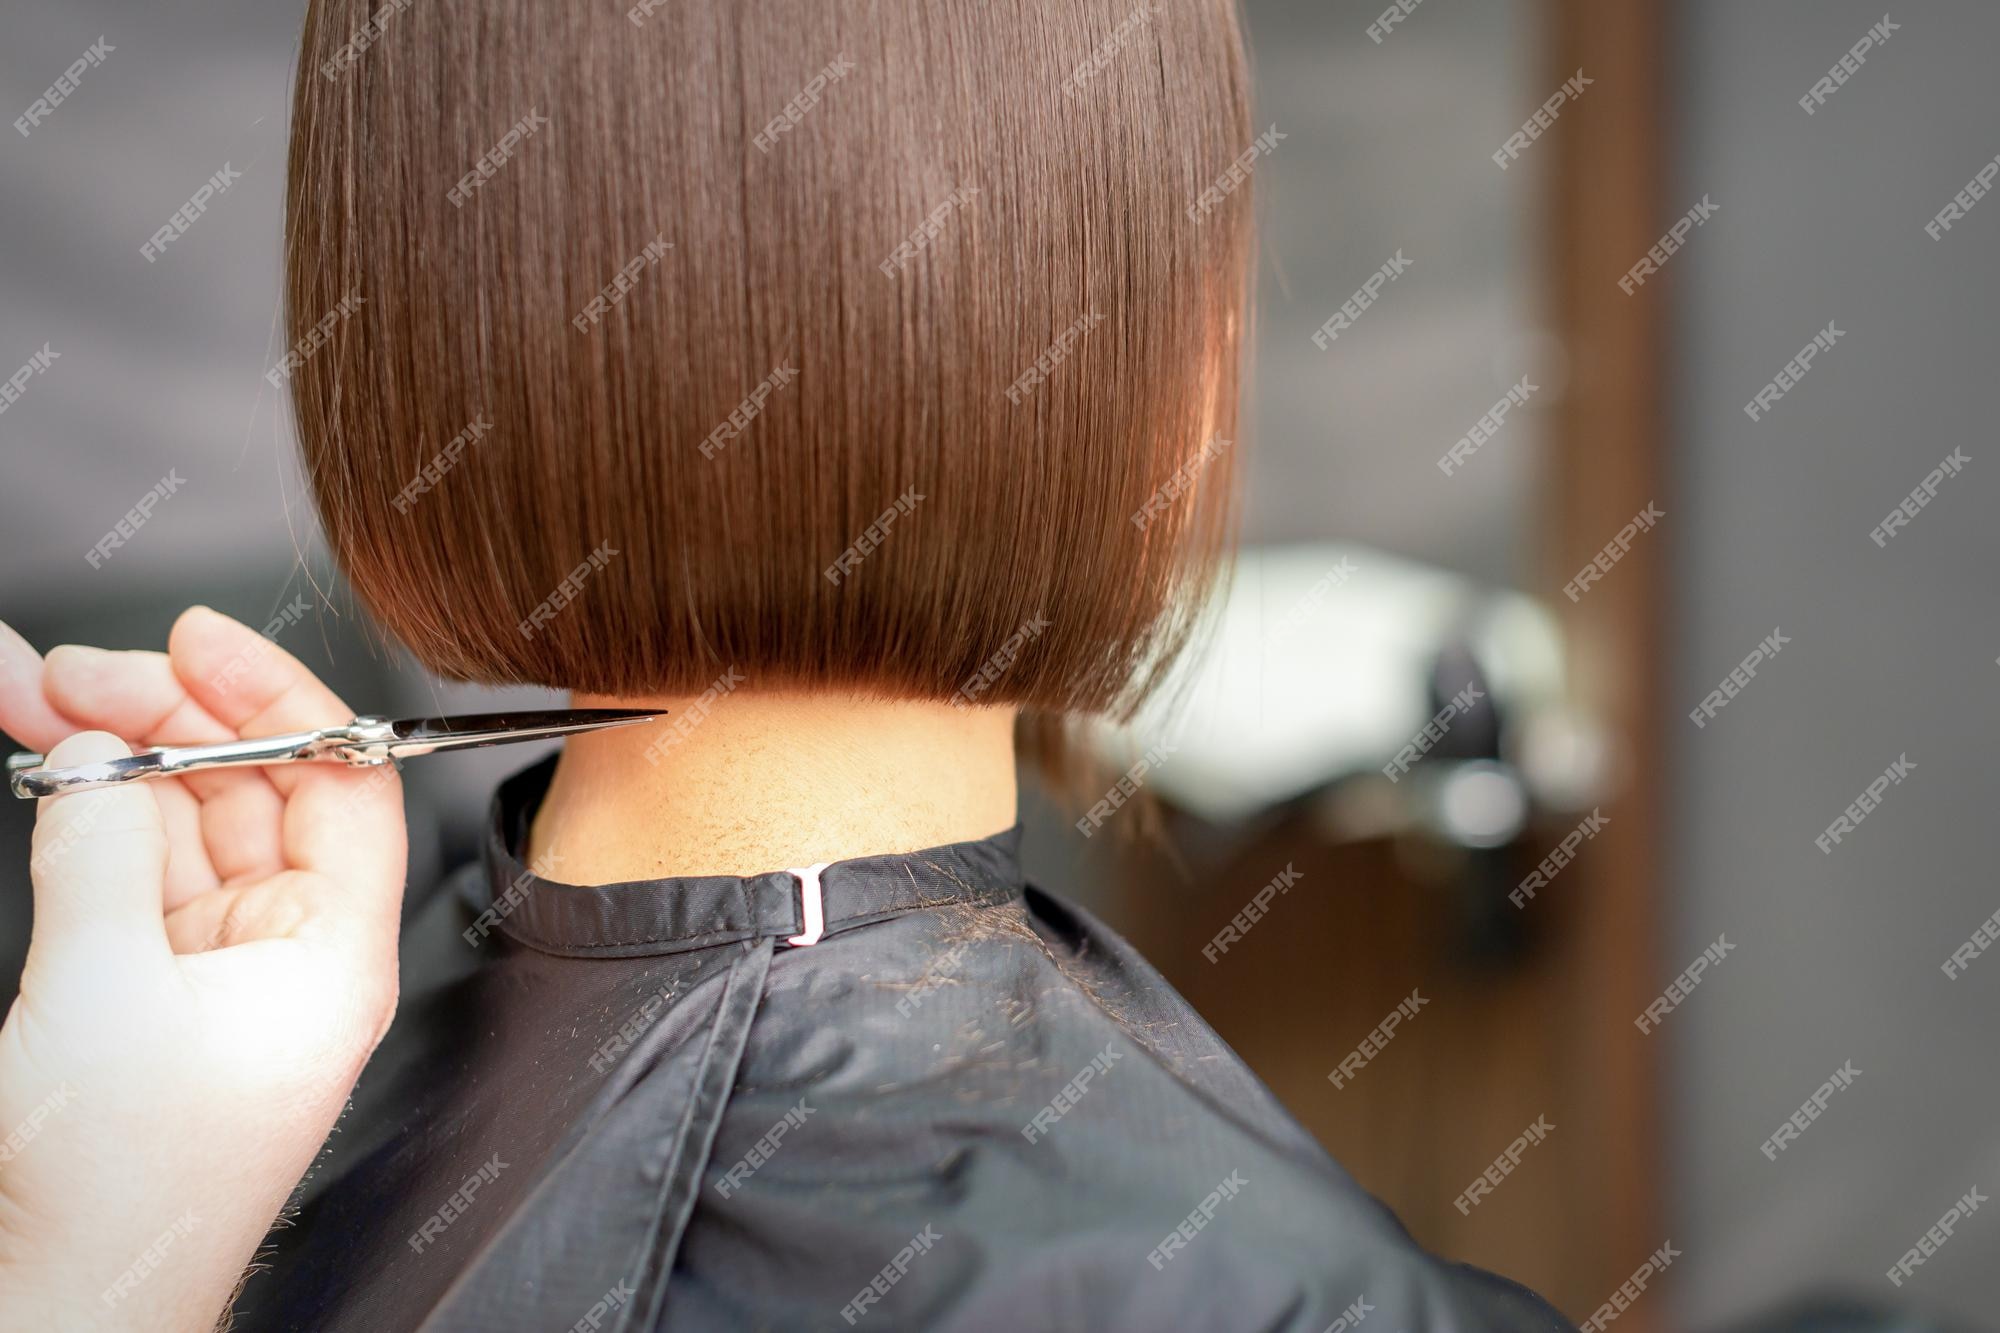 Premium Photo | The hairdresser cuts the hair of a brunette woman.  hairstylist is cutting the hair of female client in a professional hair  salon, close up.